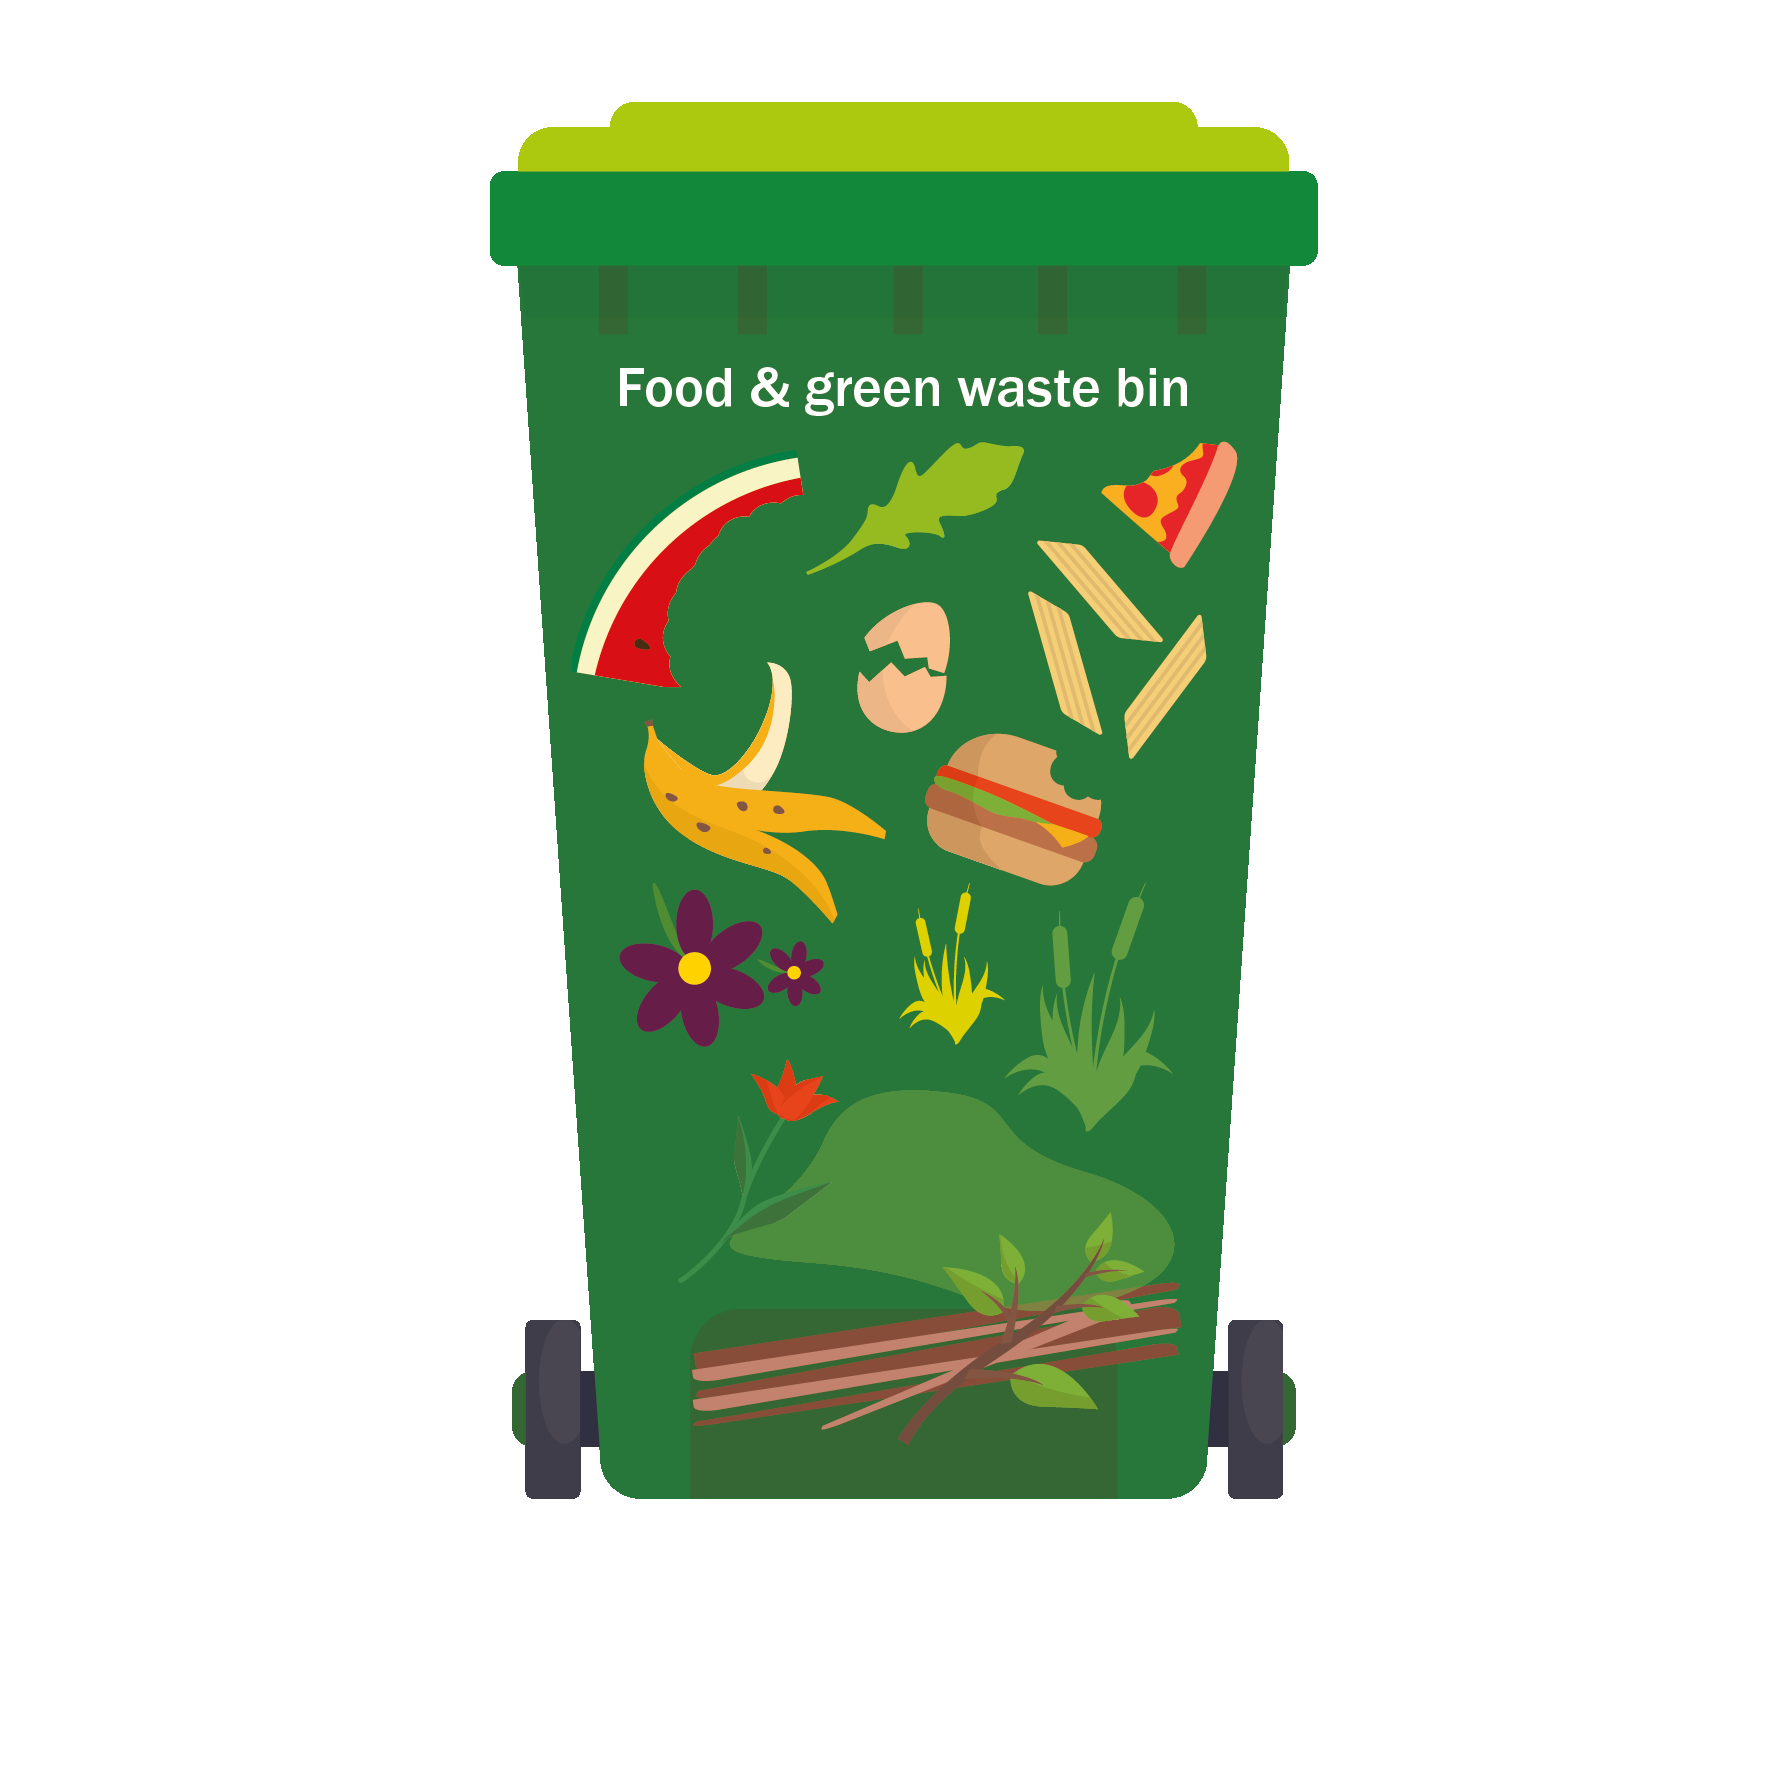 See web content for list of items accepted in green waste